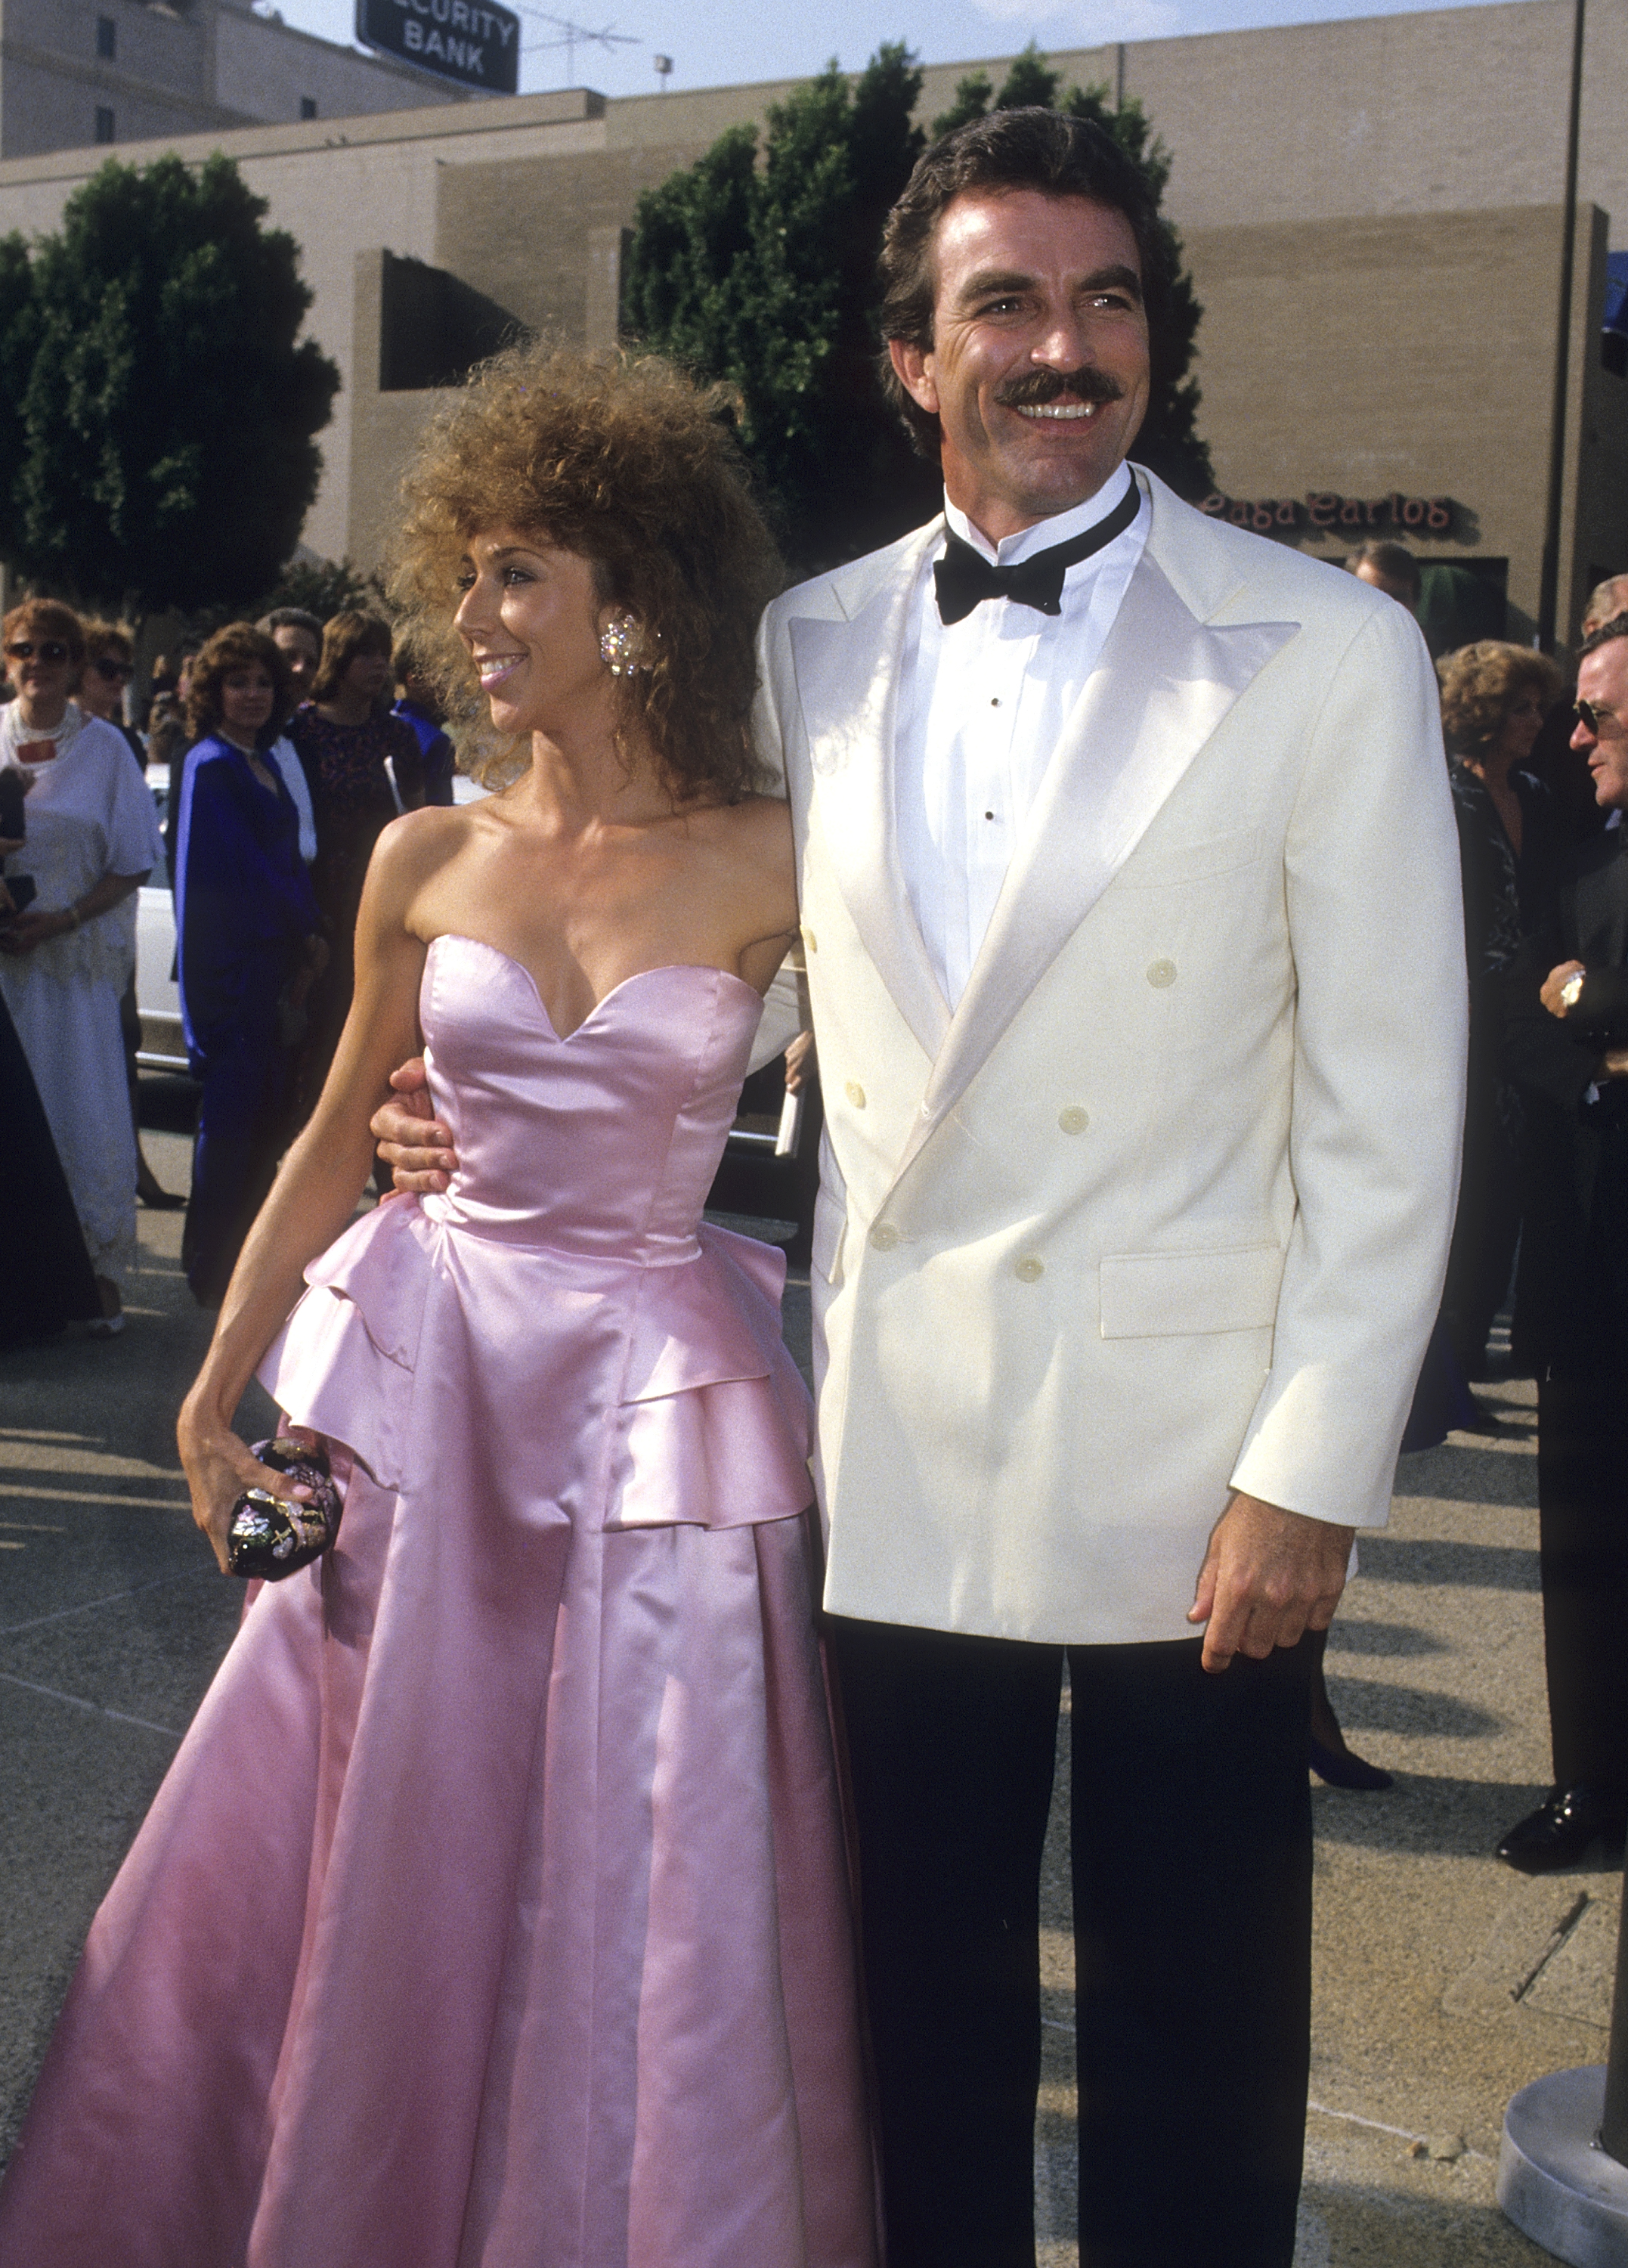 Tom Selleck and Jillie Mack attend the 39th Annual Primetime Emmy Awards in Pasadena, California on September 20, 1987. | Source: Getty Images